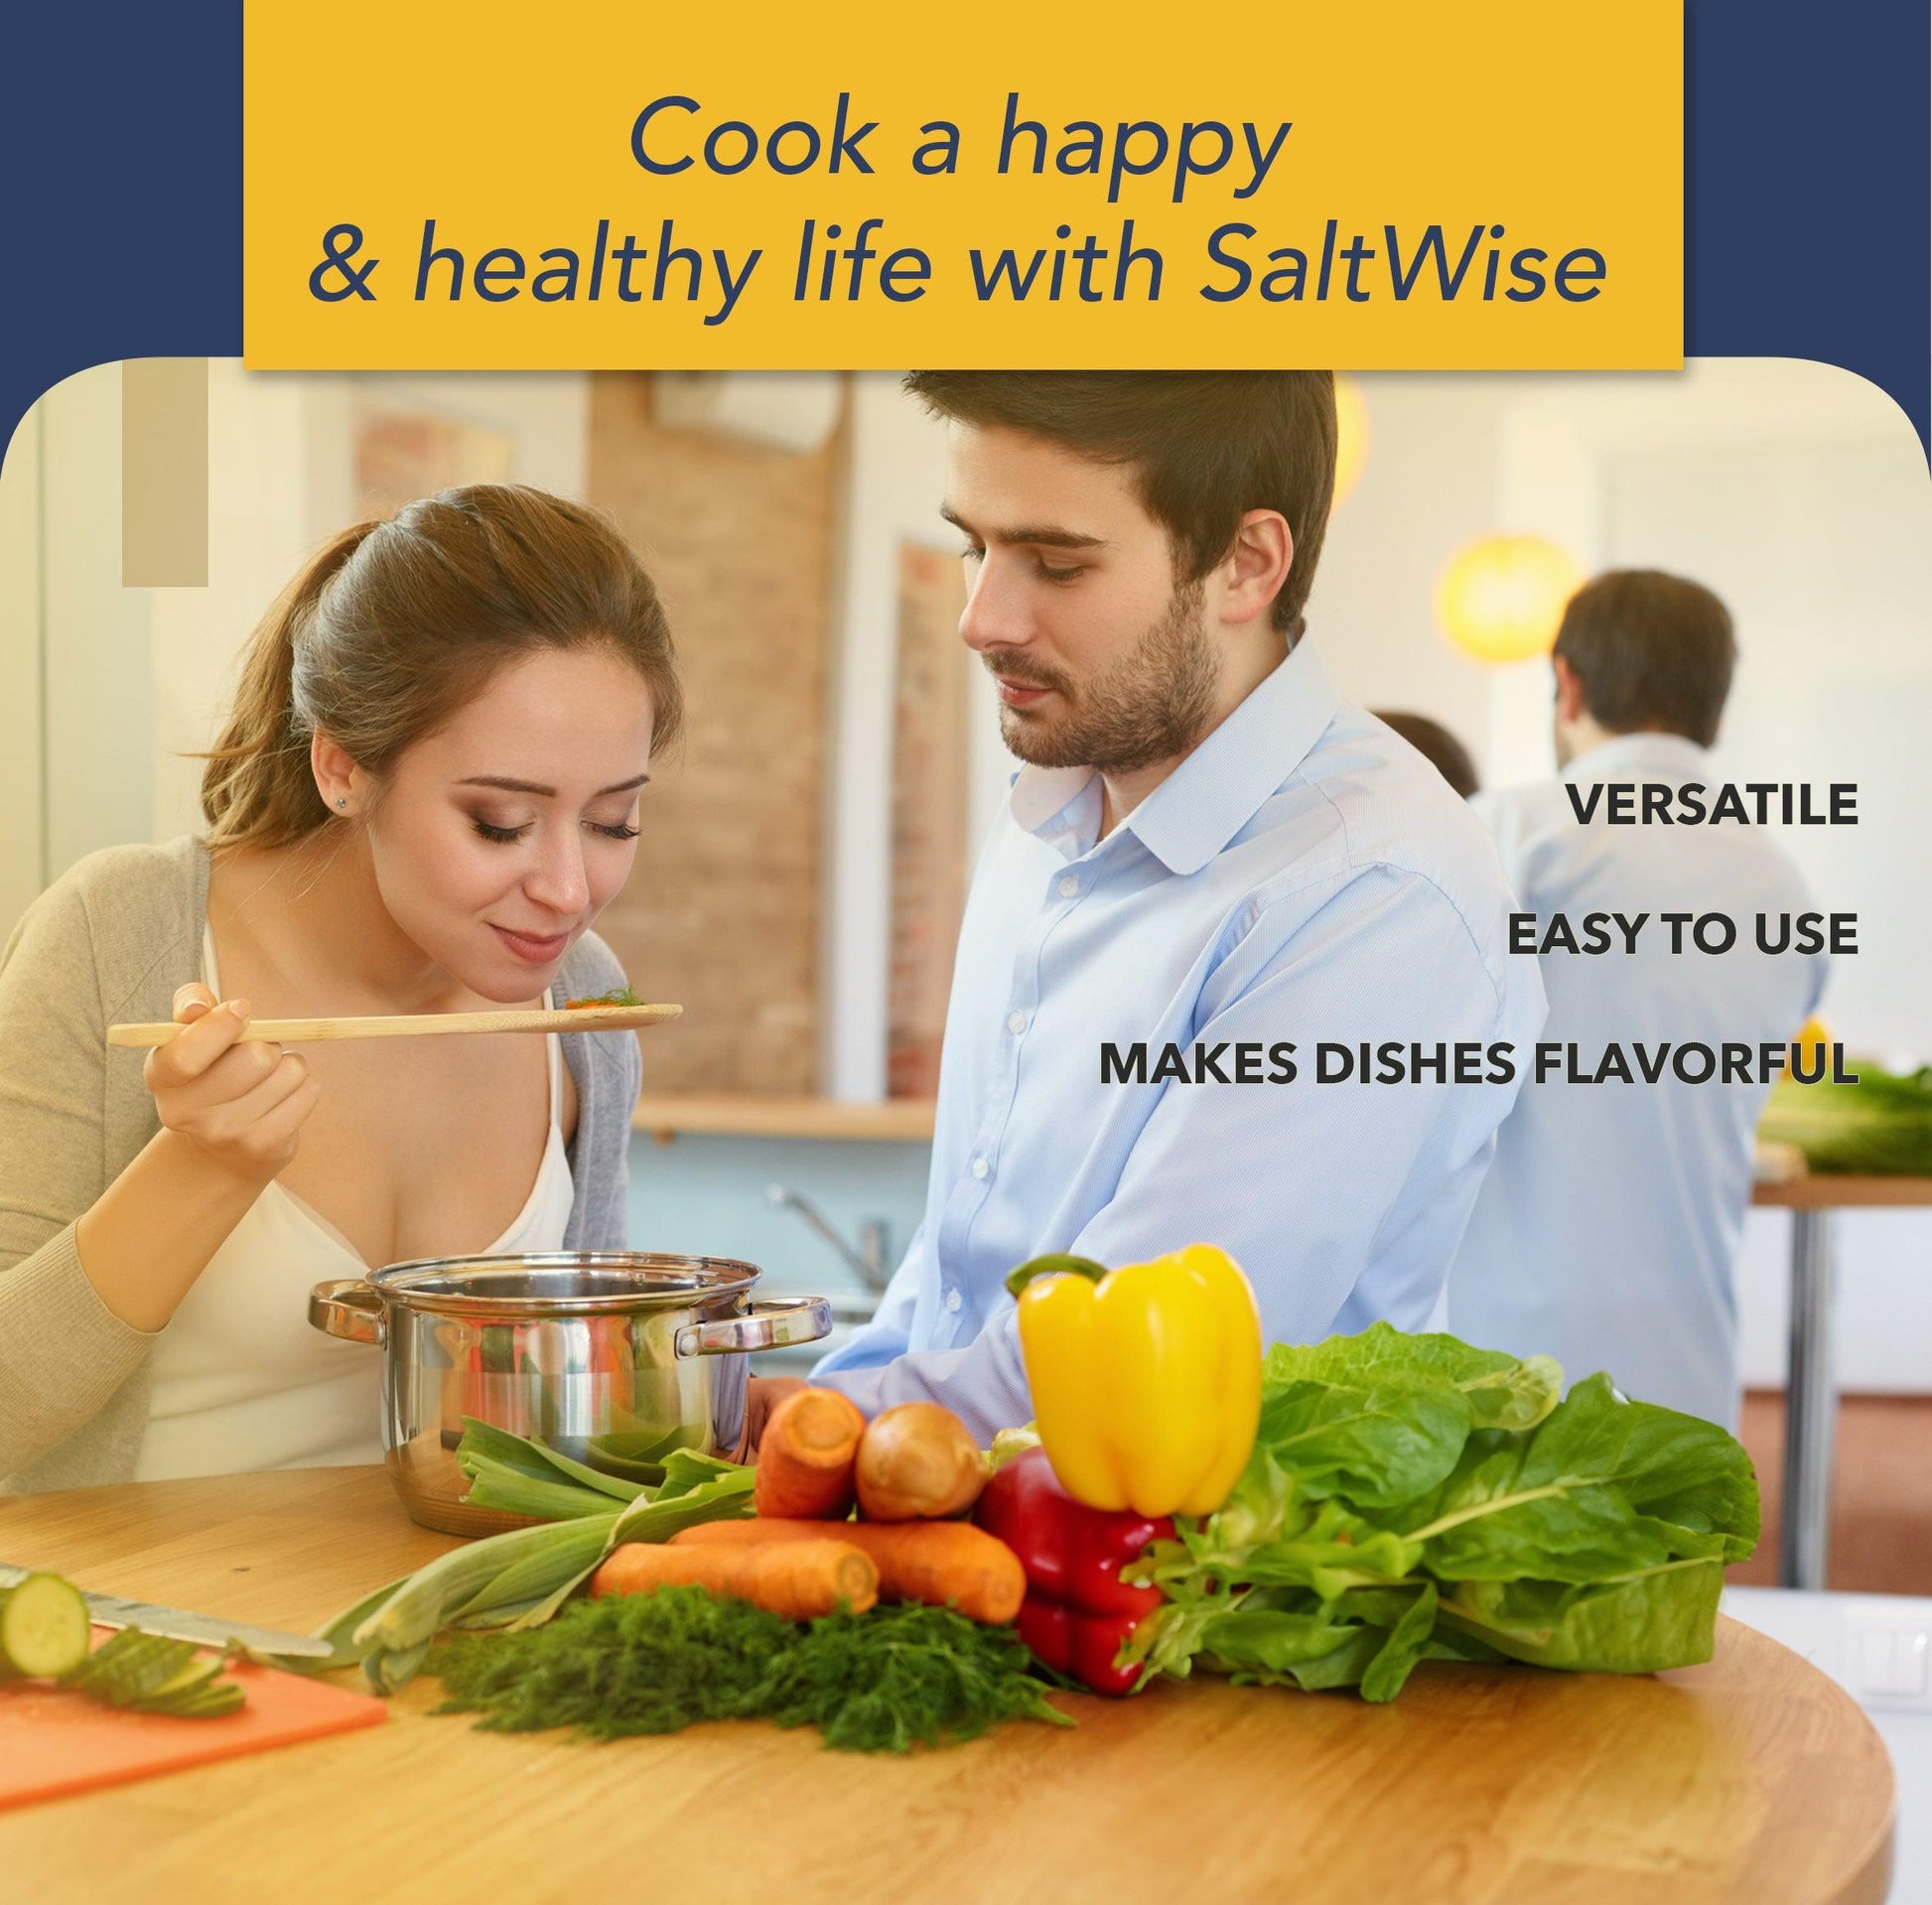 Make your dishes flavorful with Salicornia Green Salt. Cook a happy and healthy life with SaltWise.